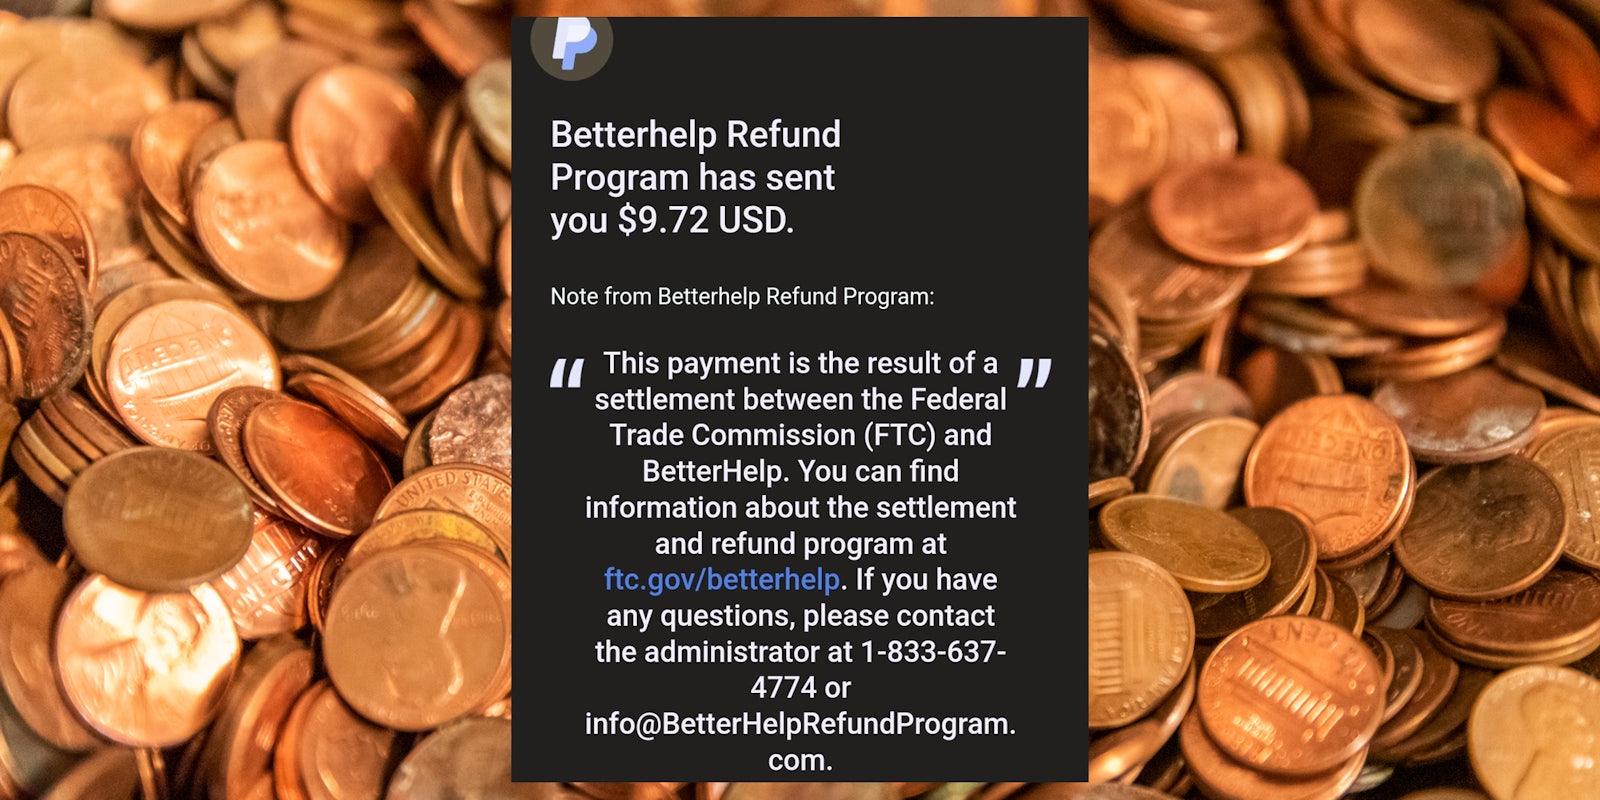 'Betterhelp Refund Program has sent you $9.72 USD. Note from Betterhelp Refund Program: 'This payment is the result of a settlement between the FTC and Betterhelp. You can find information about the settlement and refund program at ftc.gov/betterhelp. If you have any questions, please contact the administrator at 1-833-637-4774 or info@BetterHelpRefundProgram.com' (inset) pennies (background)